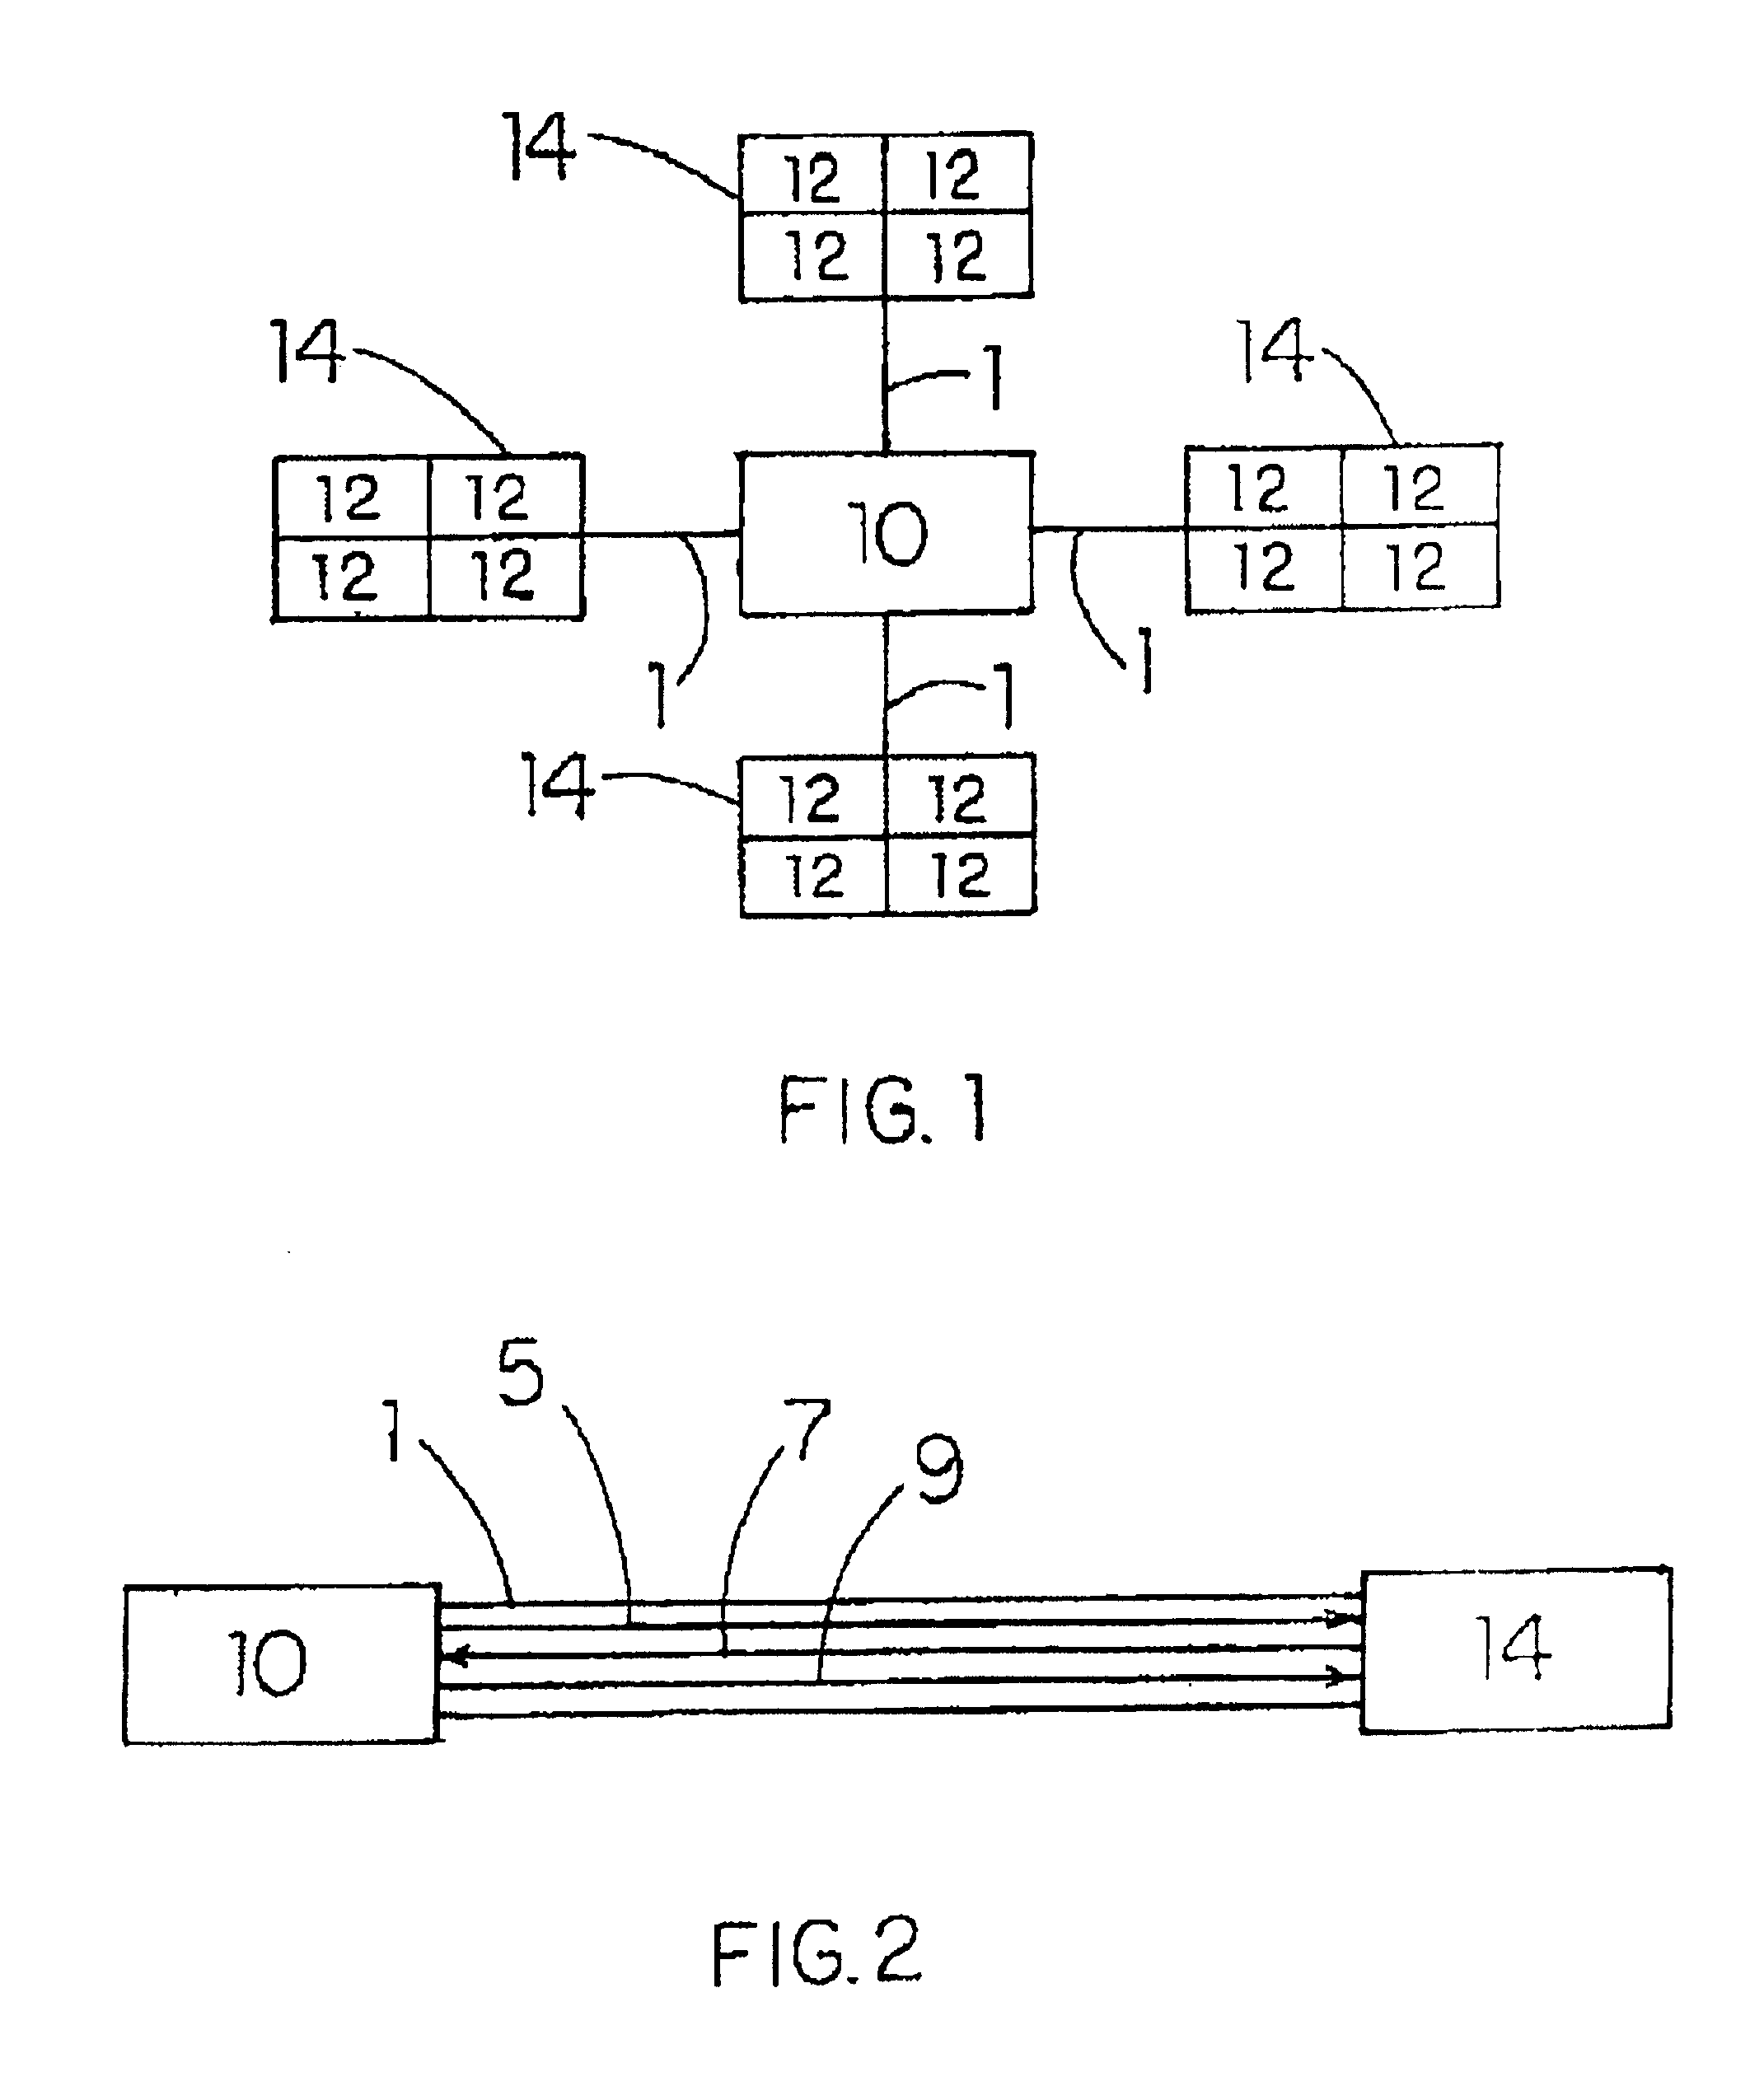 Remote supervision system and method